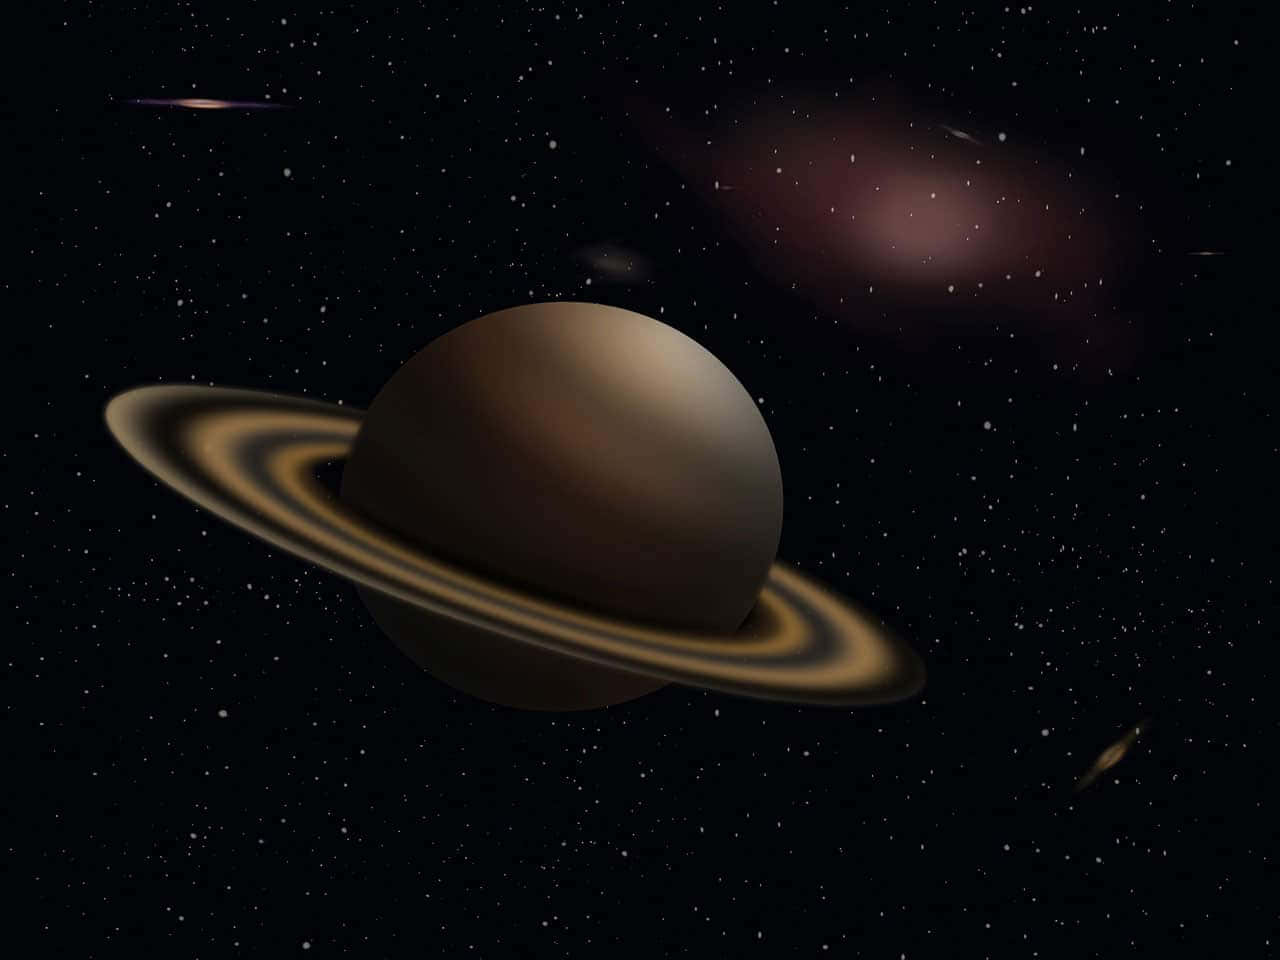 A beautiful view of Saturn shining in the night sky